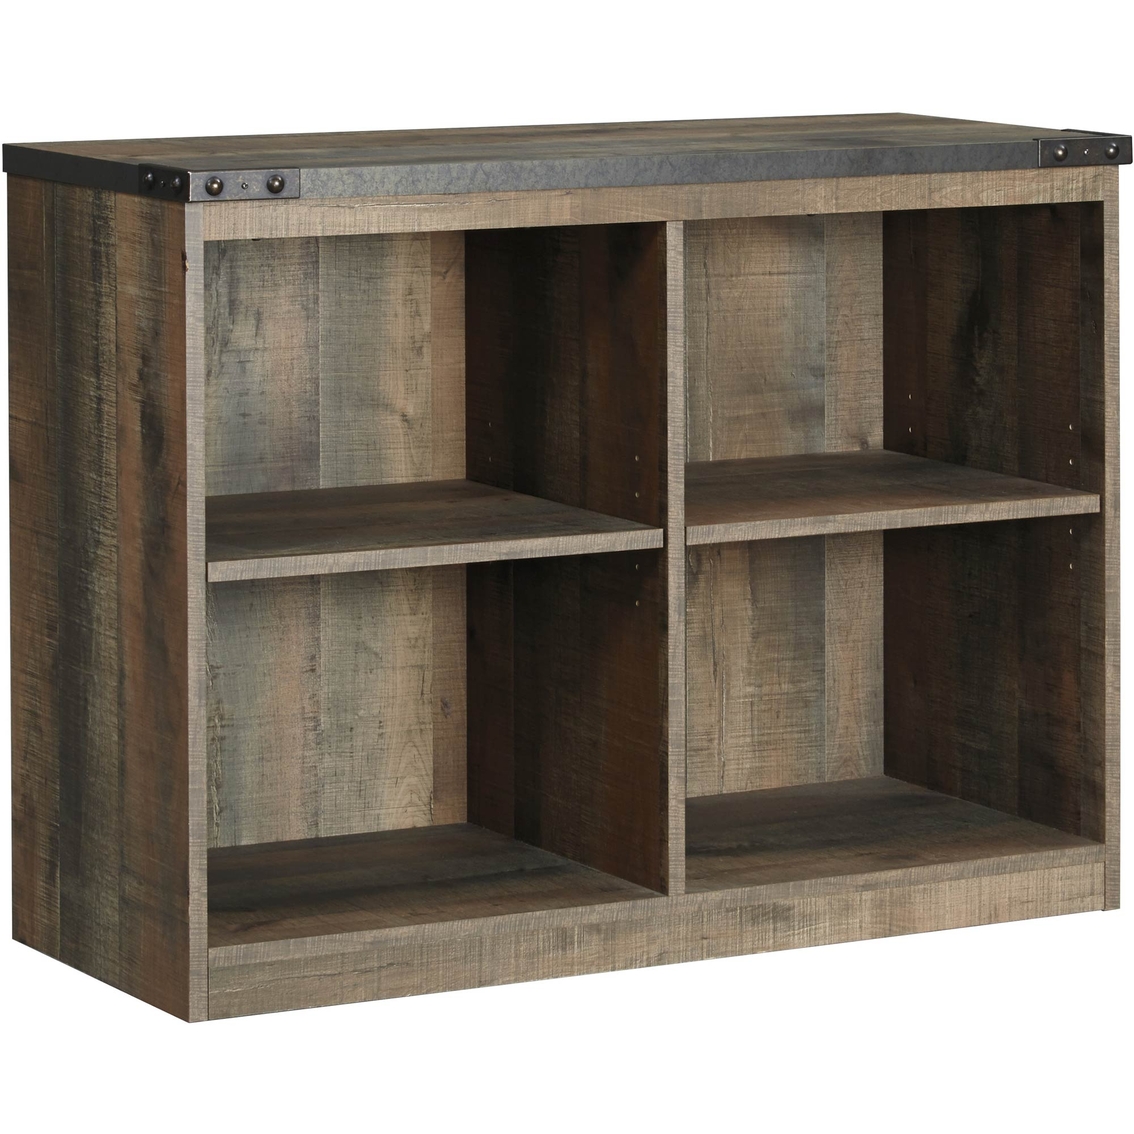 Signature Design by Ashley Trinell Loft with Bookcase and Drawers - Image 2 of 4